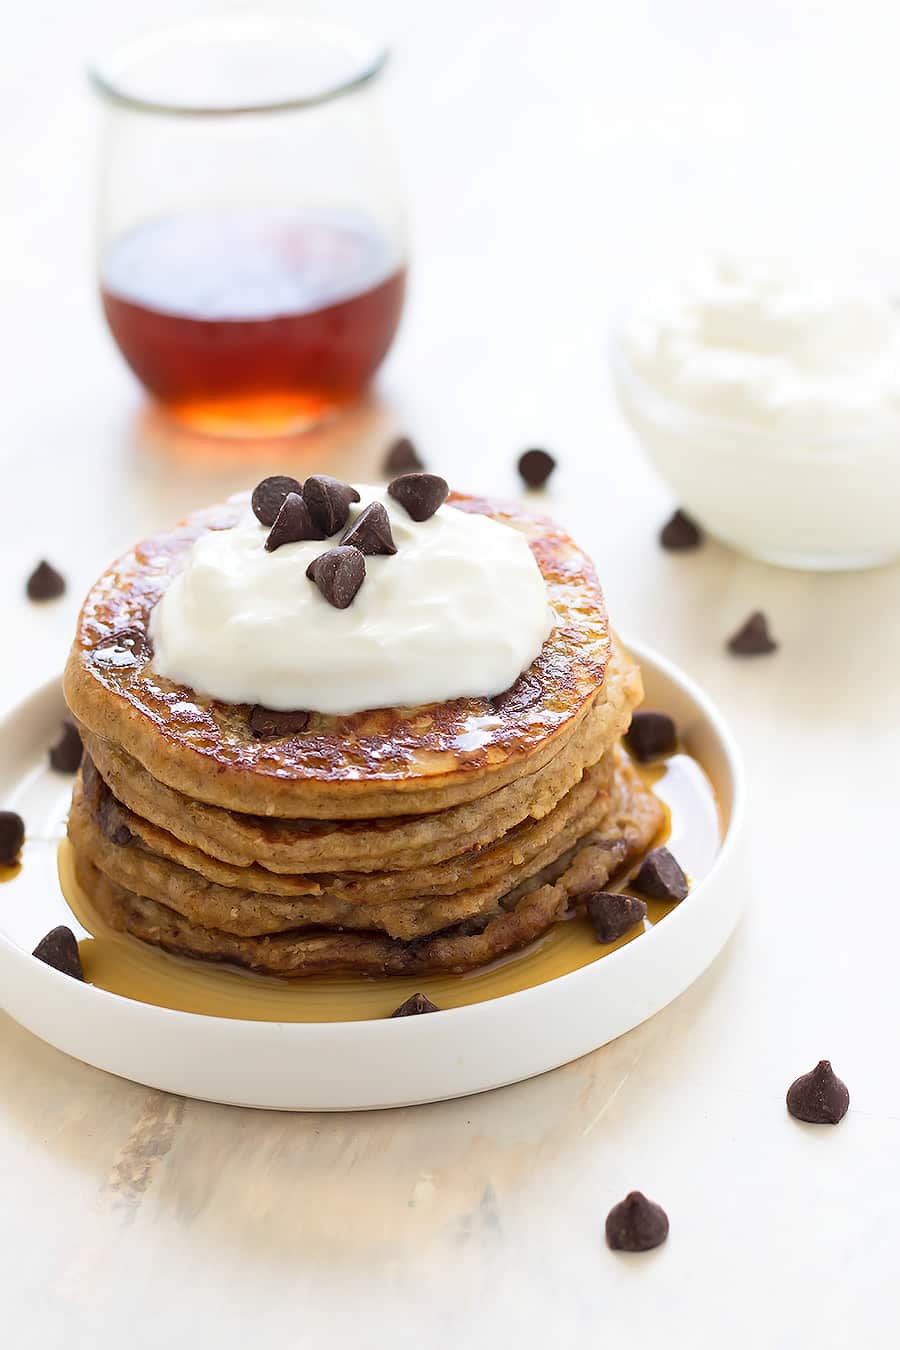 Fluffy, healthy, grain-free, dairy-free, refined sugar free, low carb chocolate chip pancakes made with almond flour, raw honey, and dark chocolate chips!